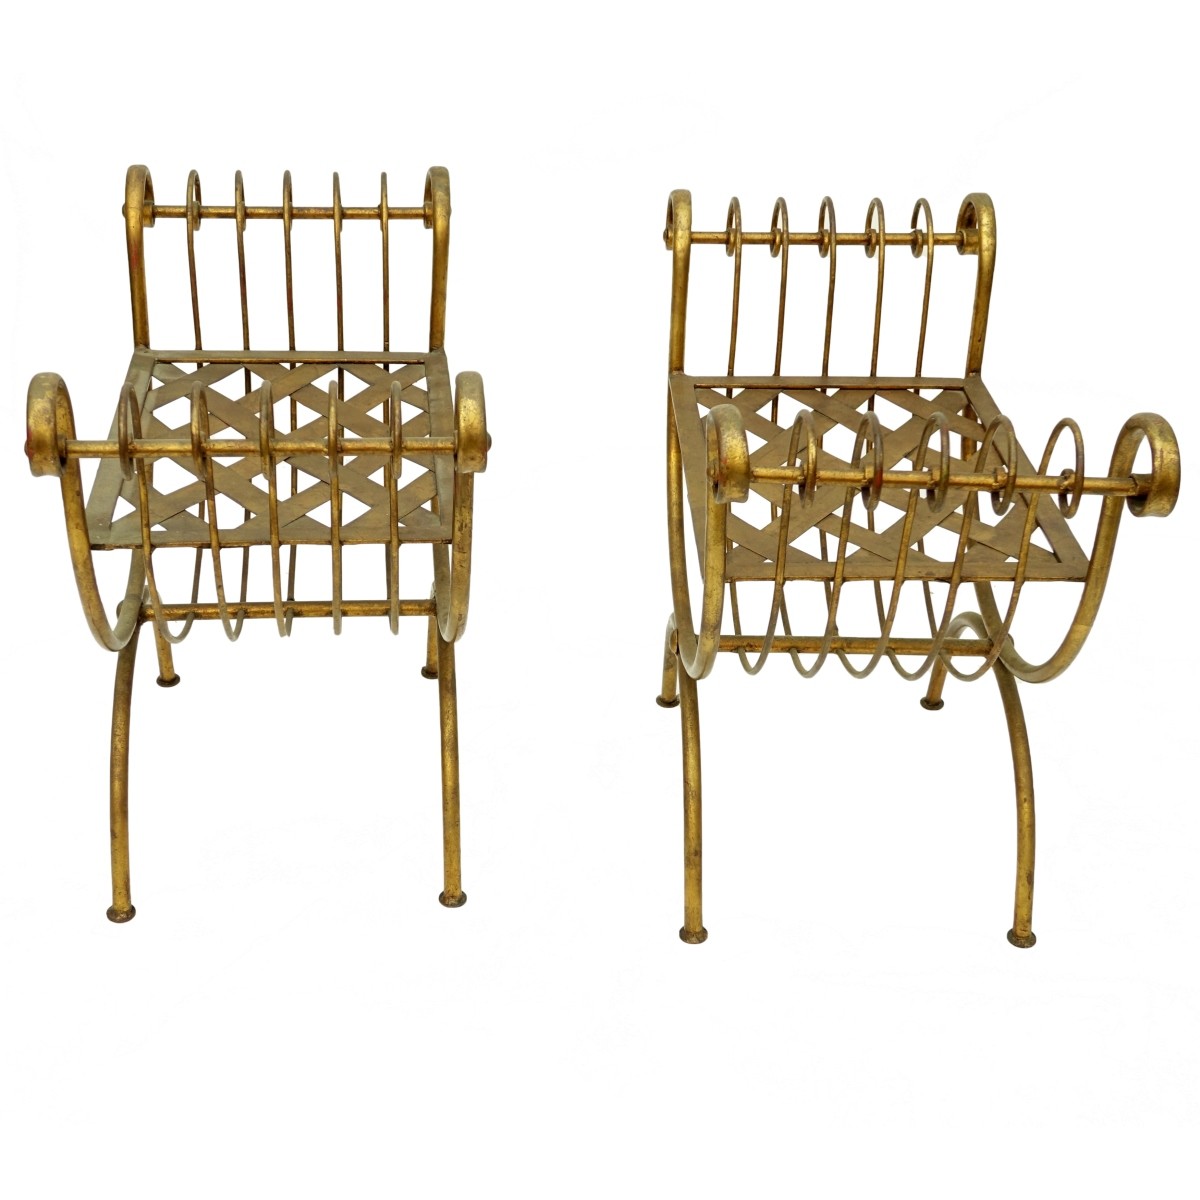 Neoclassical Style Gilt Metal Benches